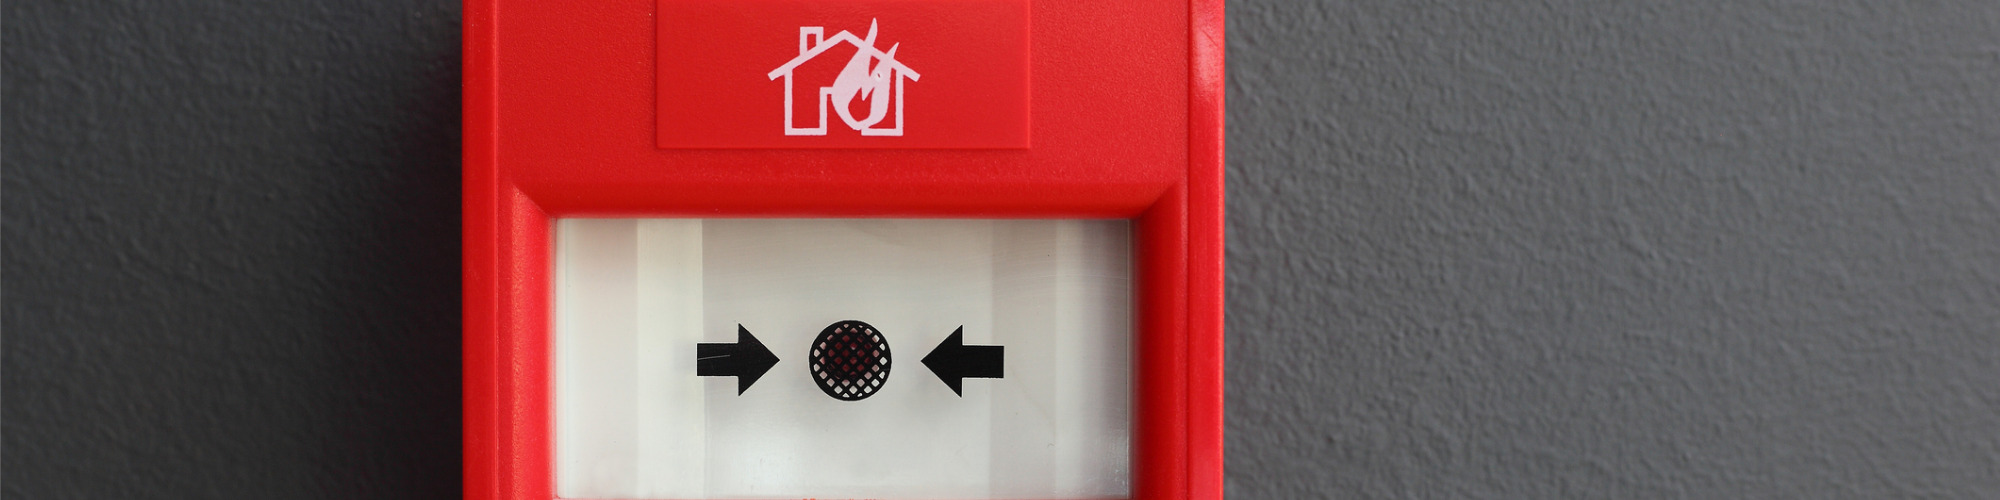 Residential Property & Fire Safety - Current Guidance for Surveyors & Property Professionals